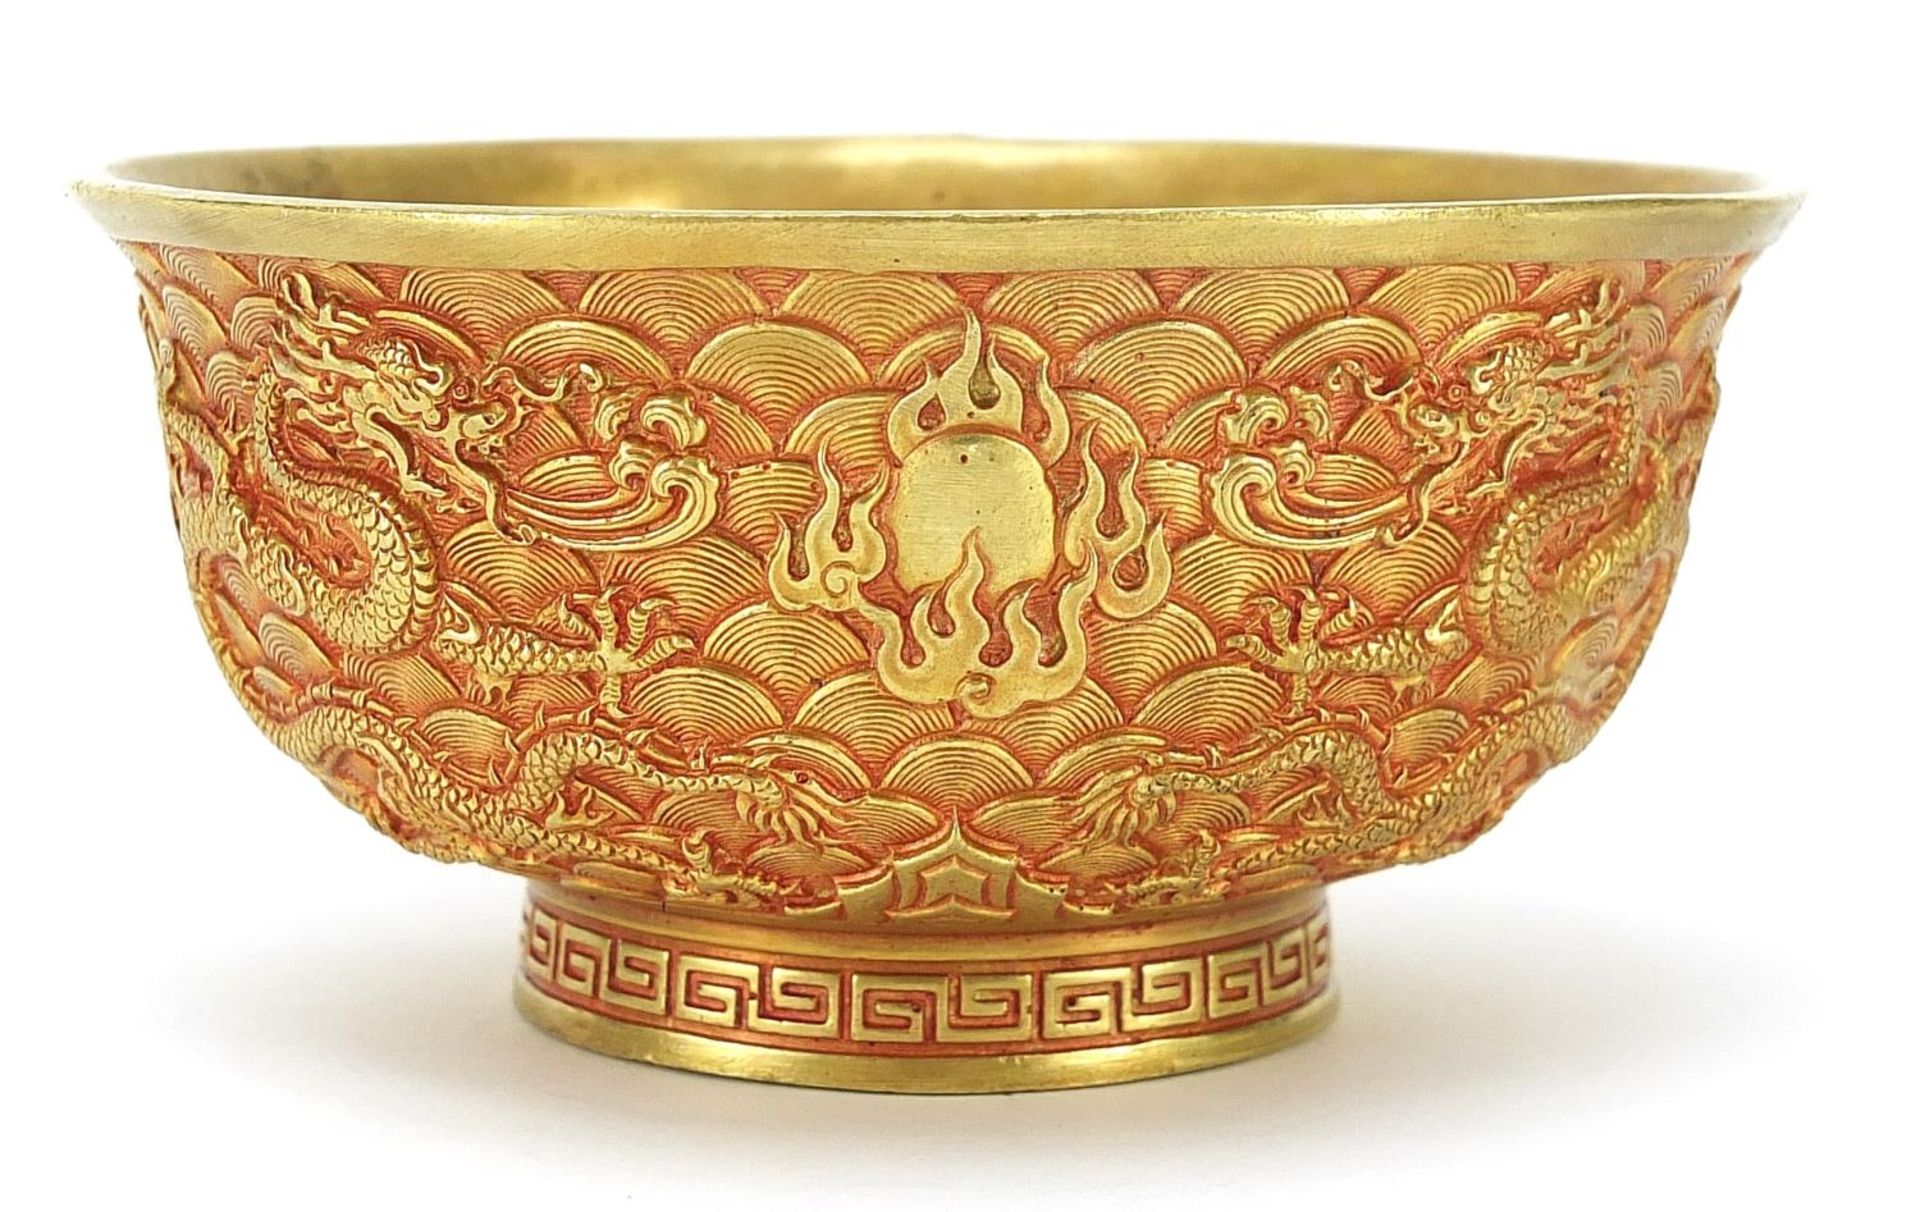 Chinese gilt bronze footed bowl cast with dragons amongst clouds chasing flaming pearls, four figure - Image 2 of 4